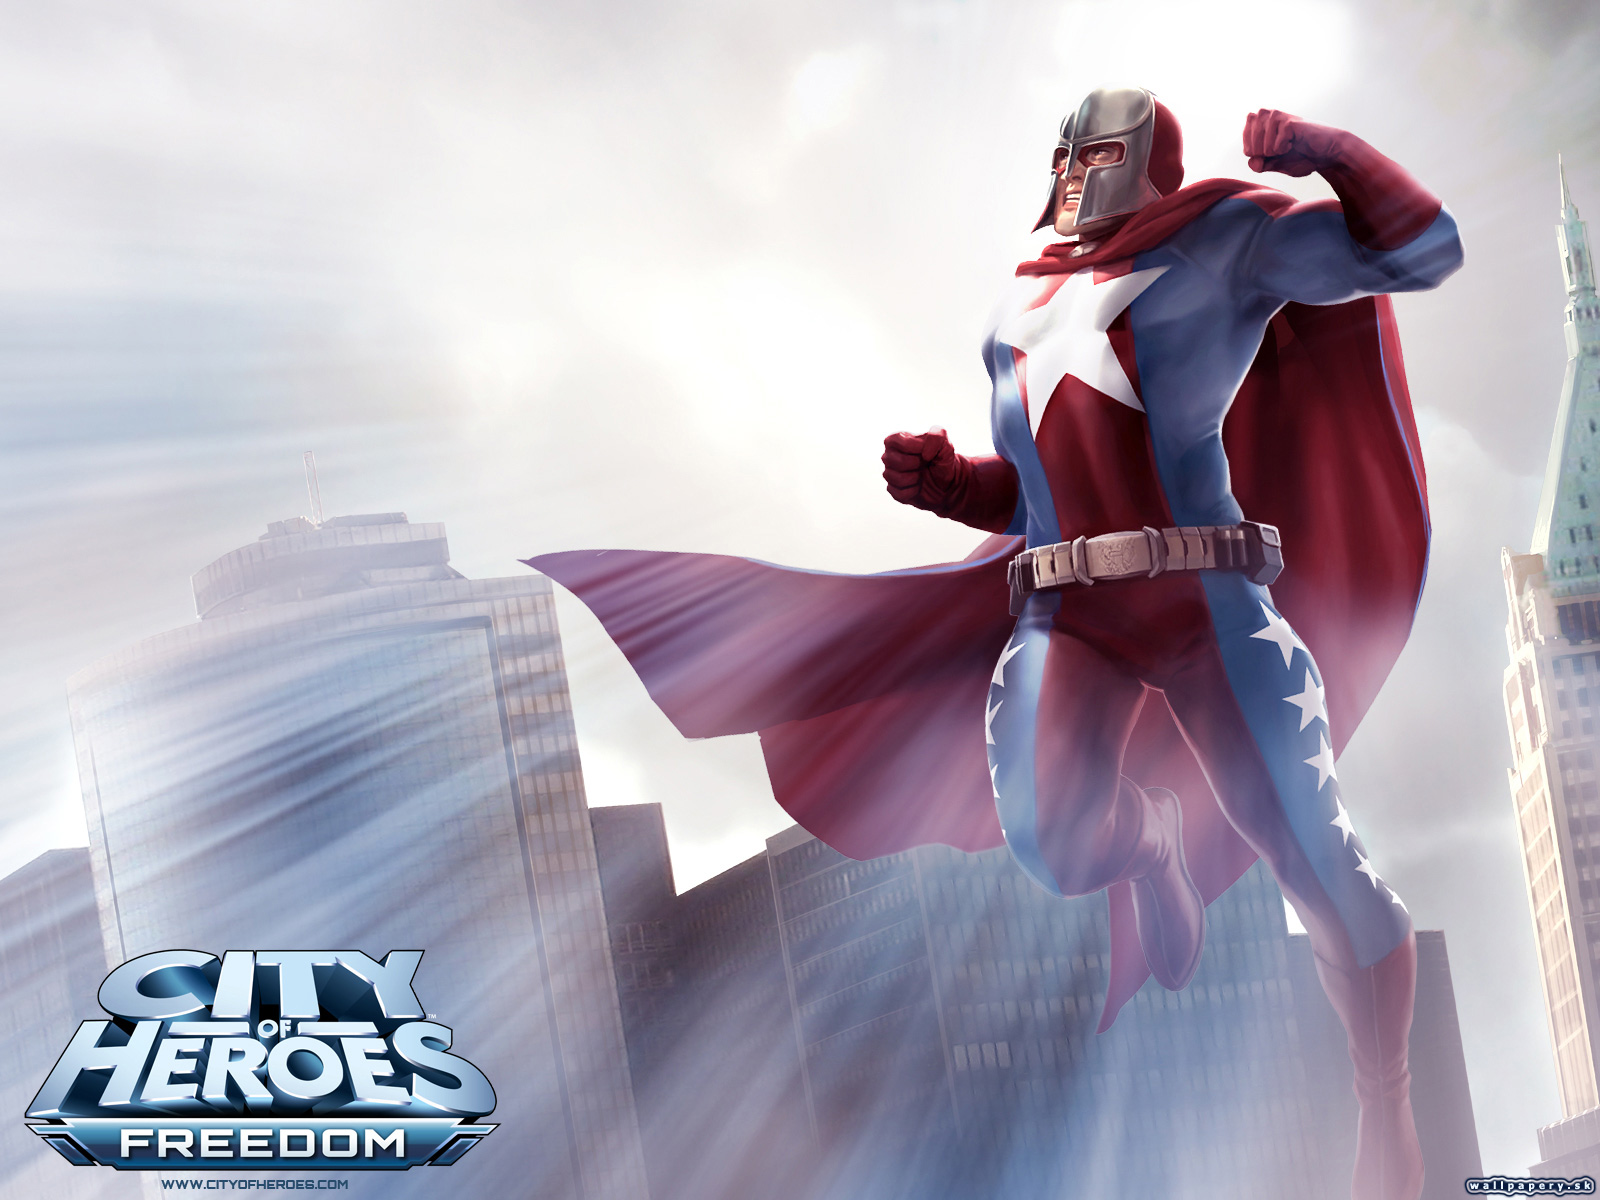 City of Heroes: Freedom - wallpaper 4